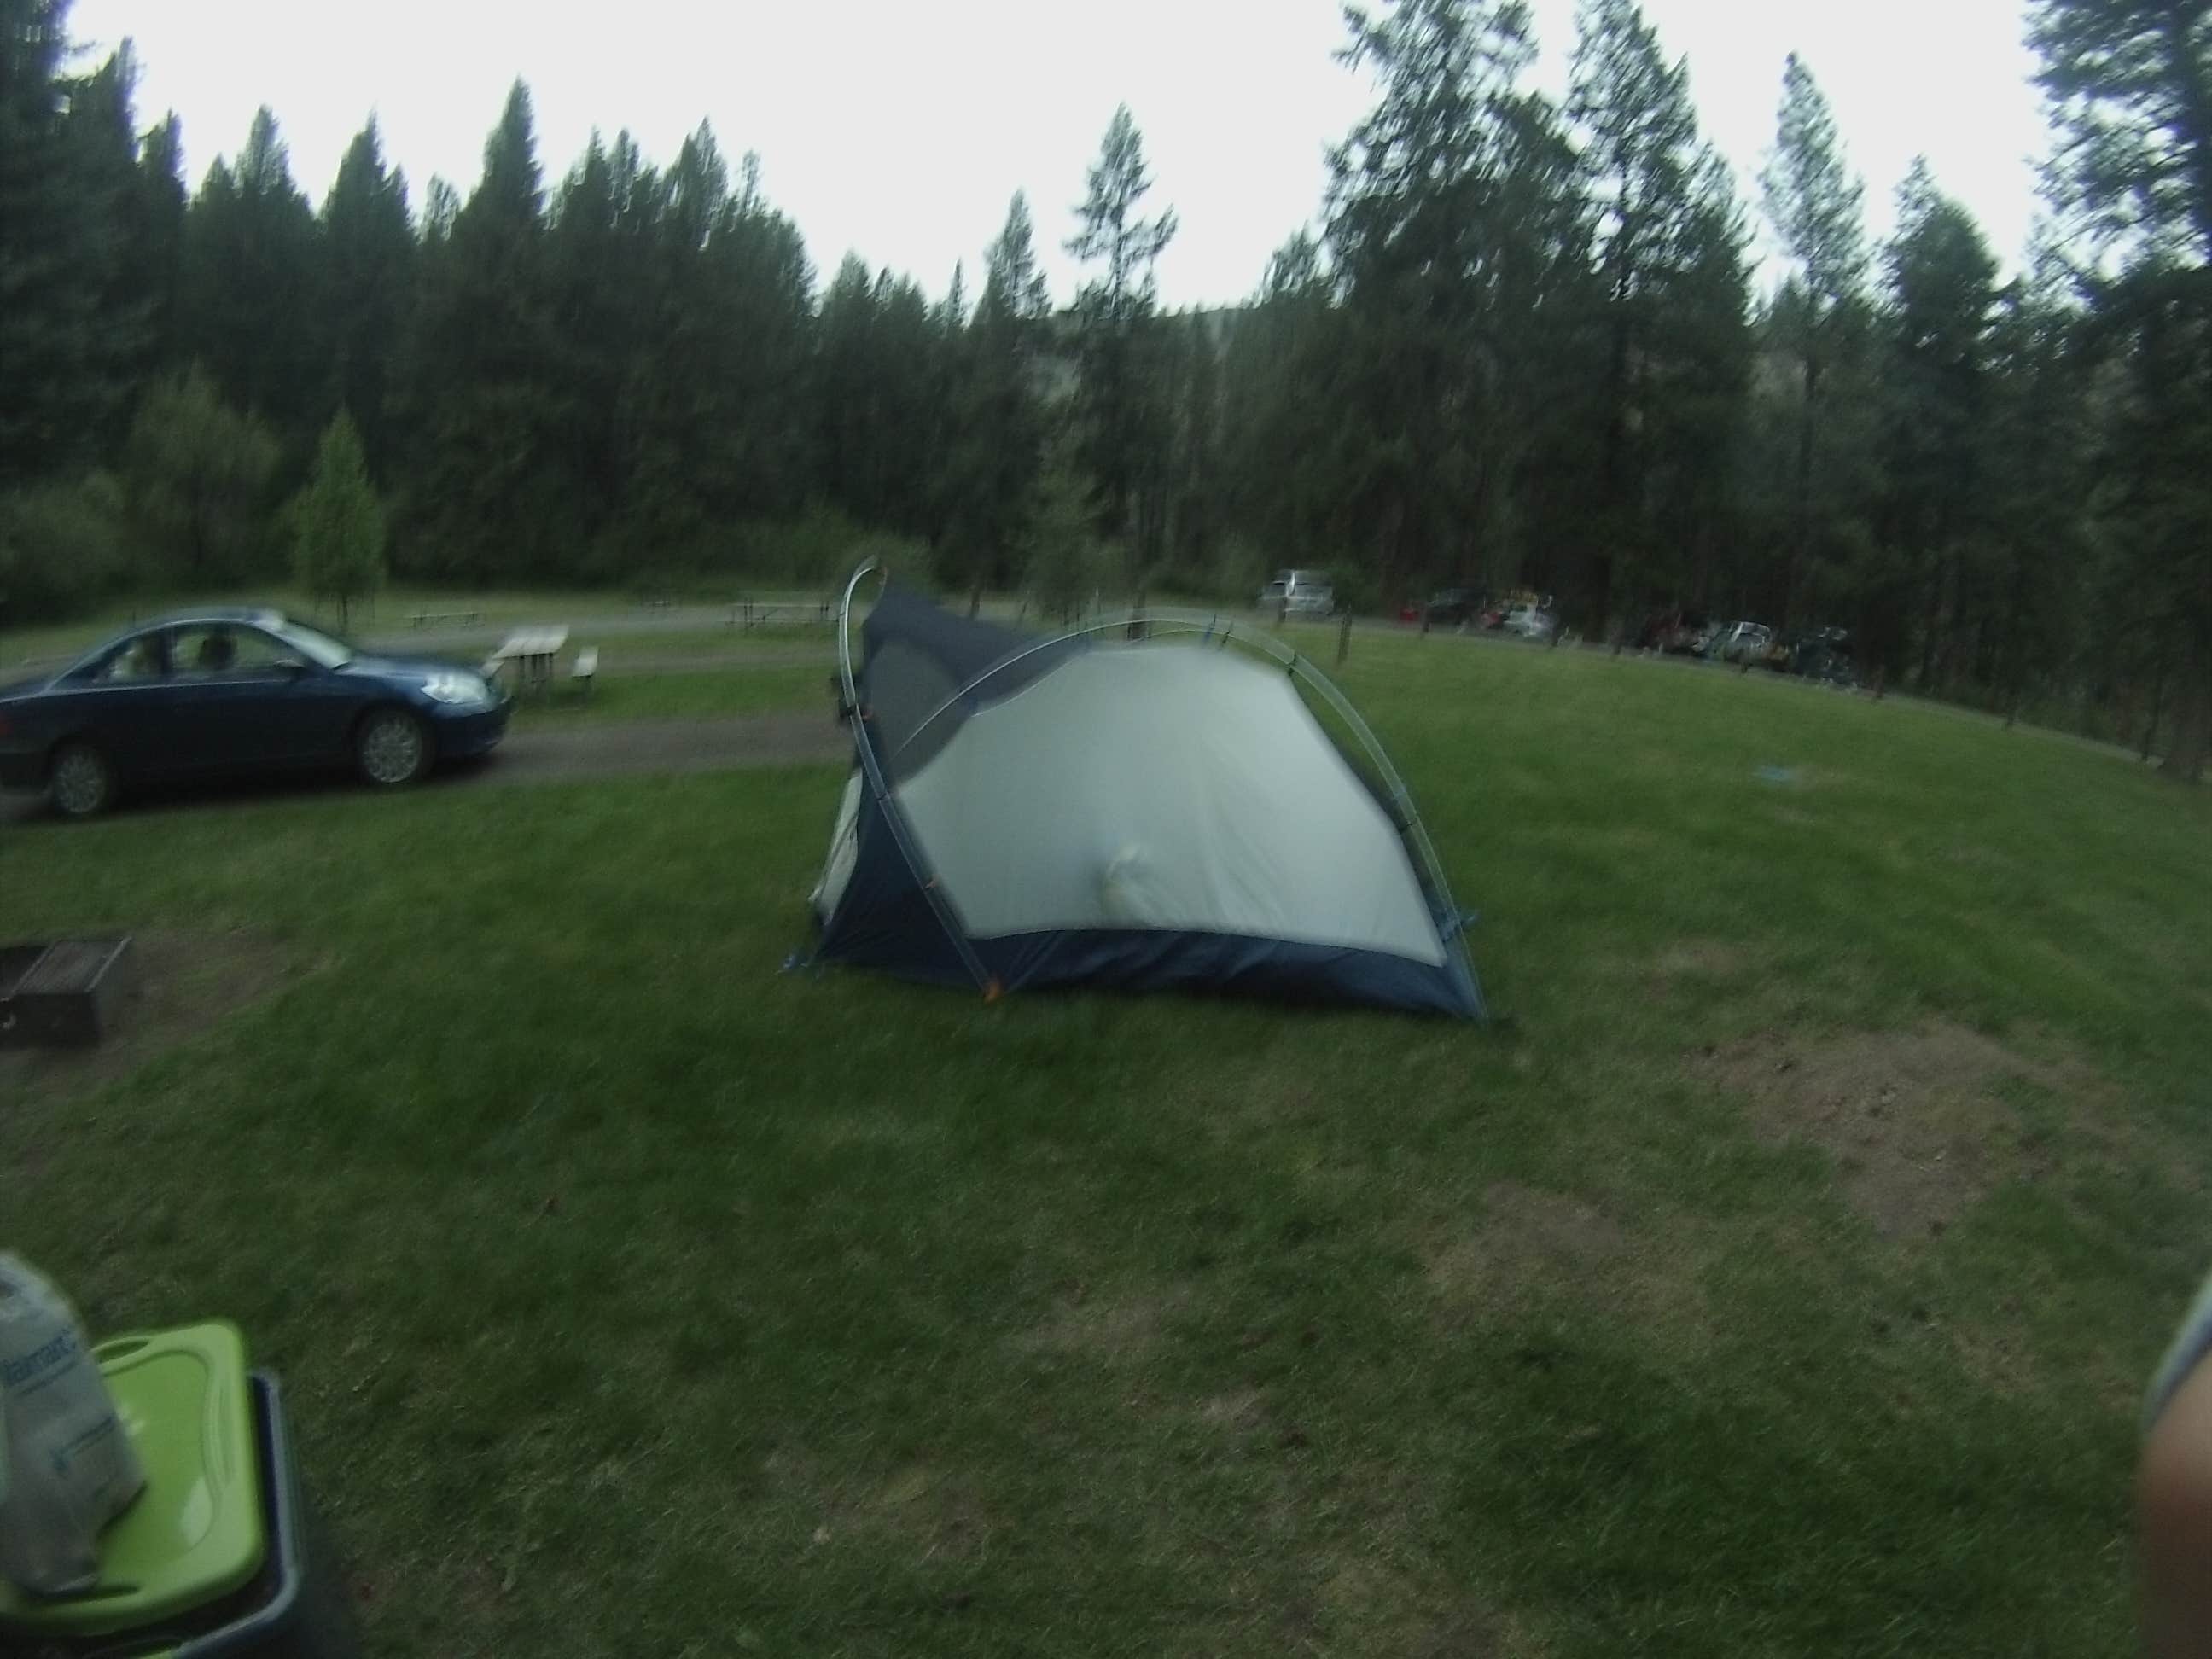 Camper submitted image from Minam State Recreation Area - 5